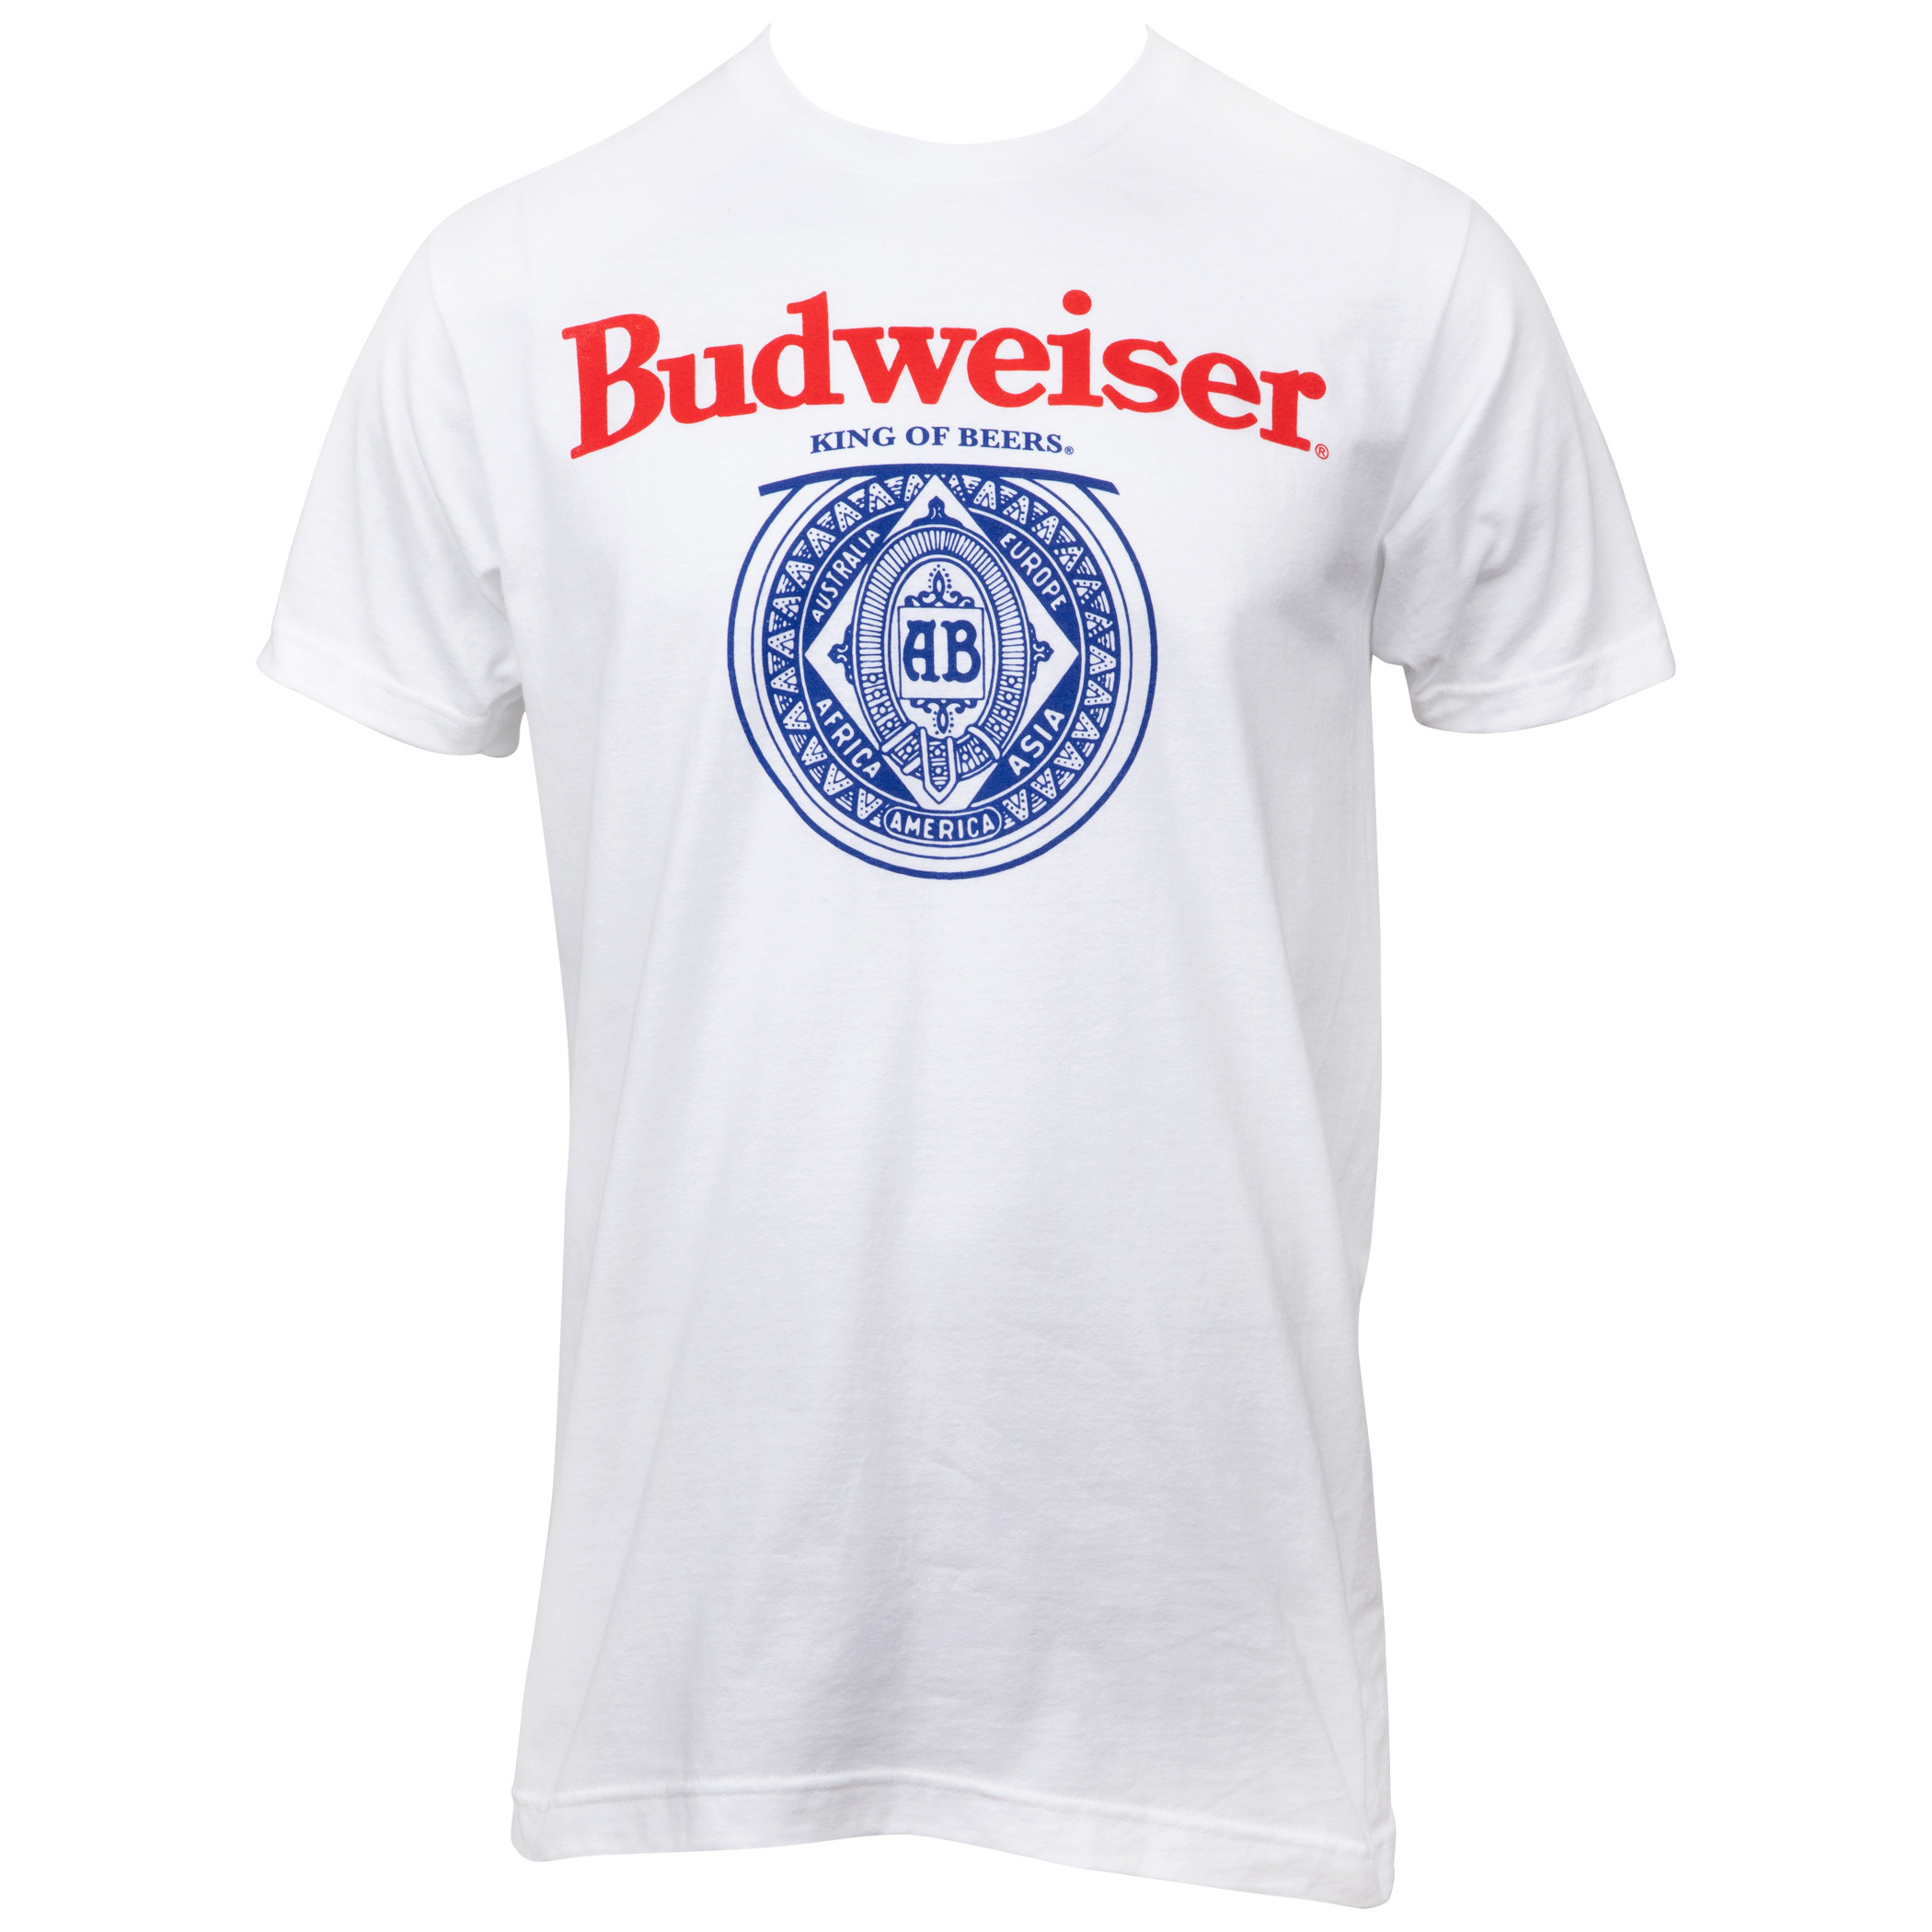 Budweiser King of Beers Front and Back Print T-Shirt